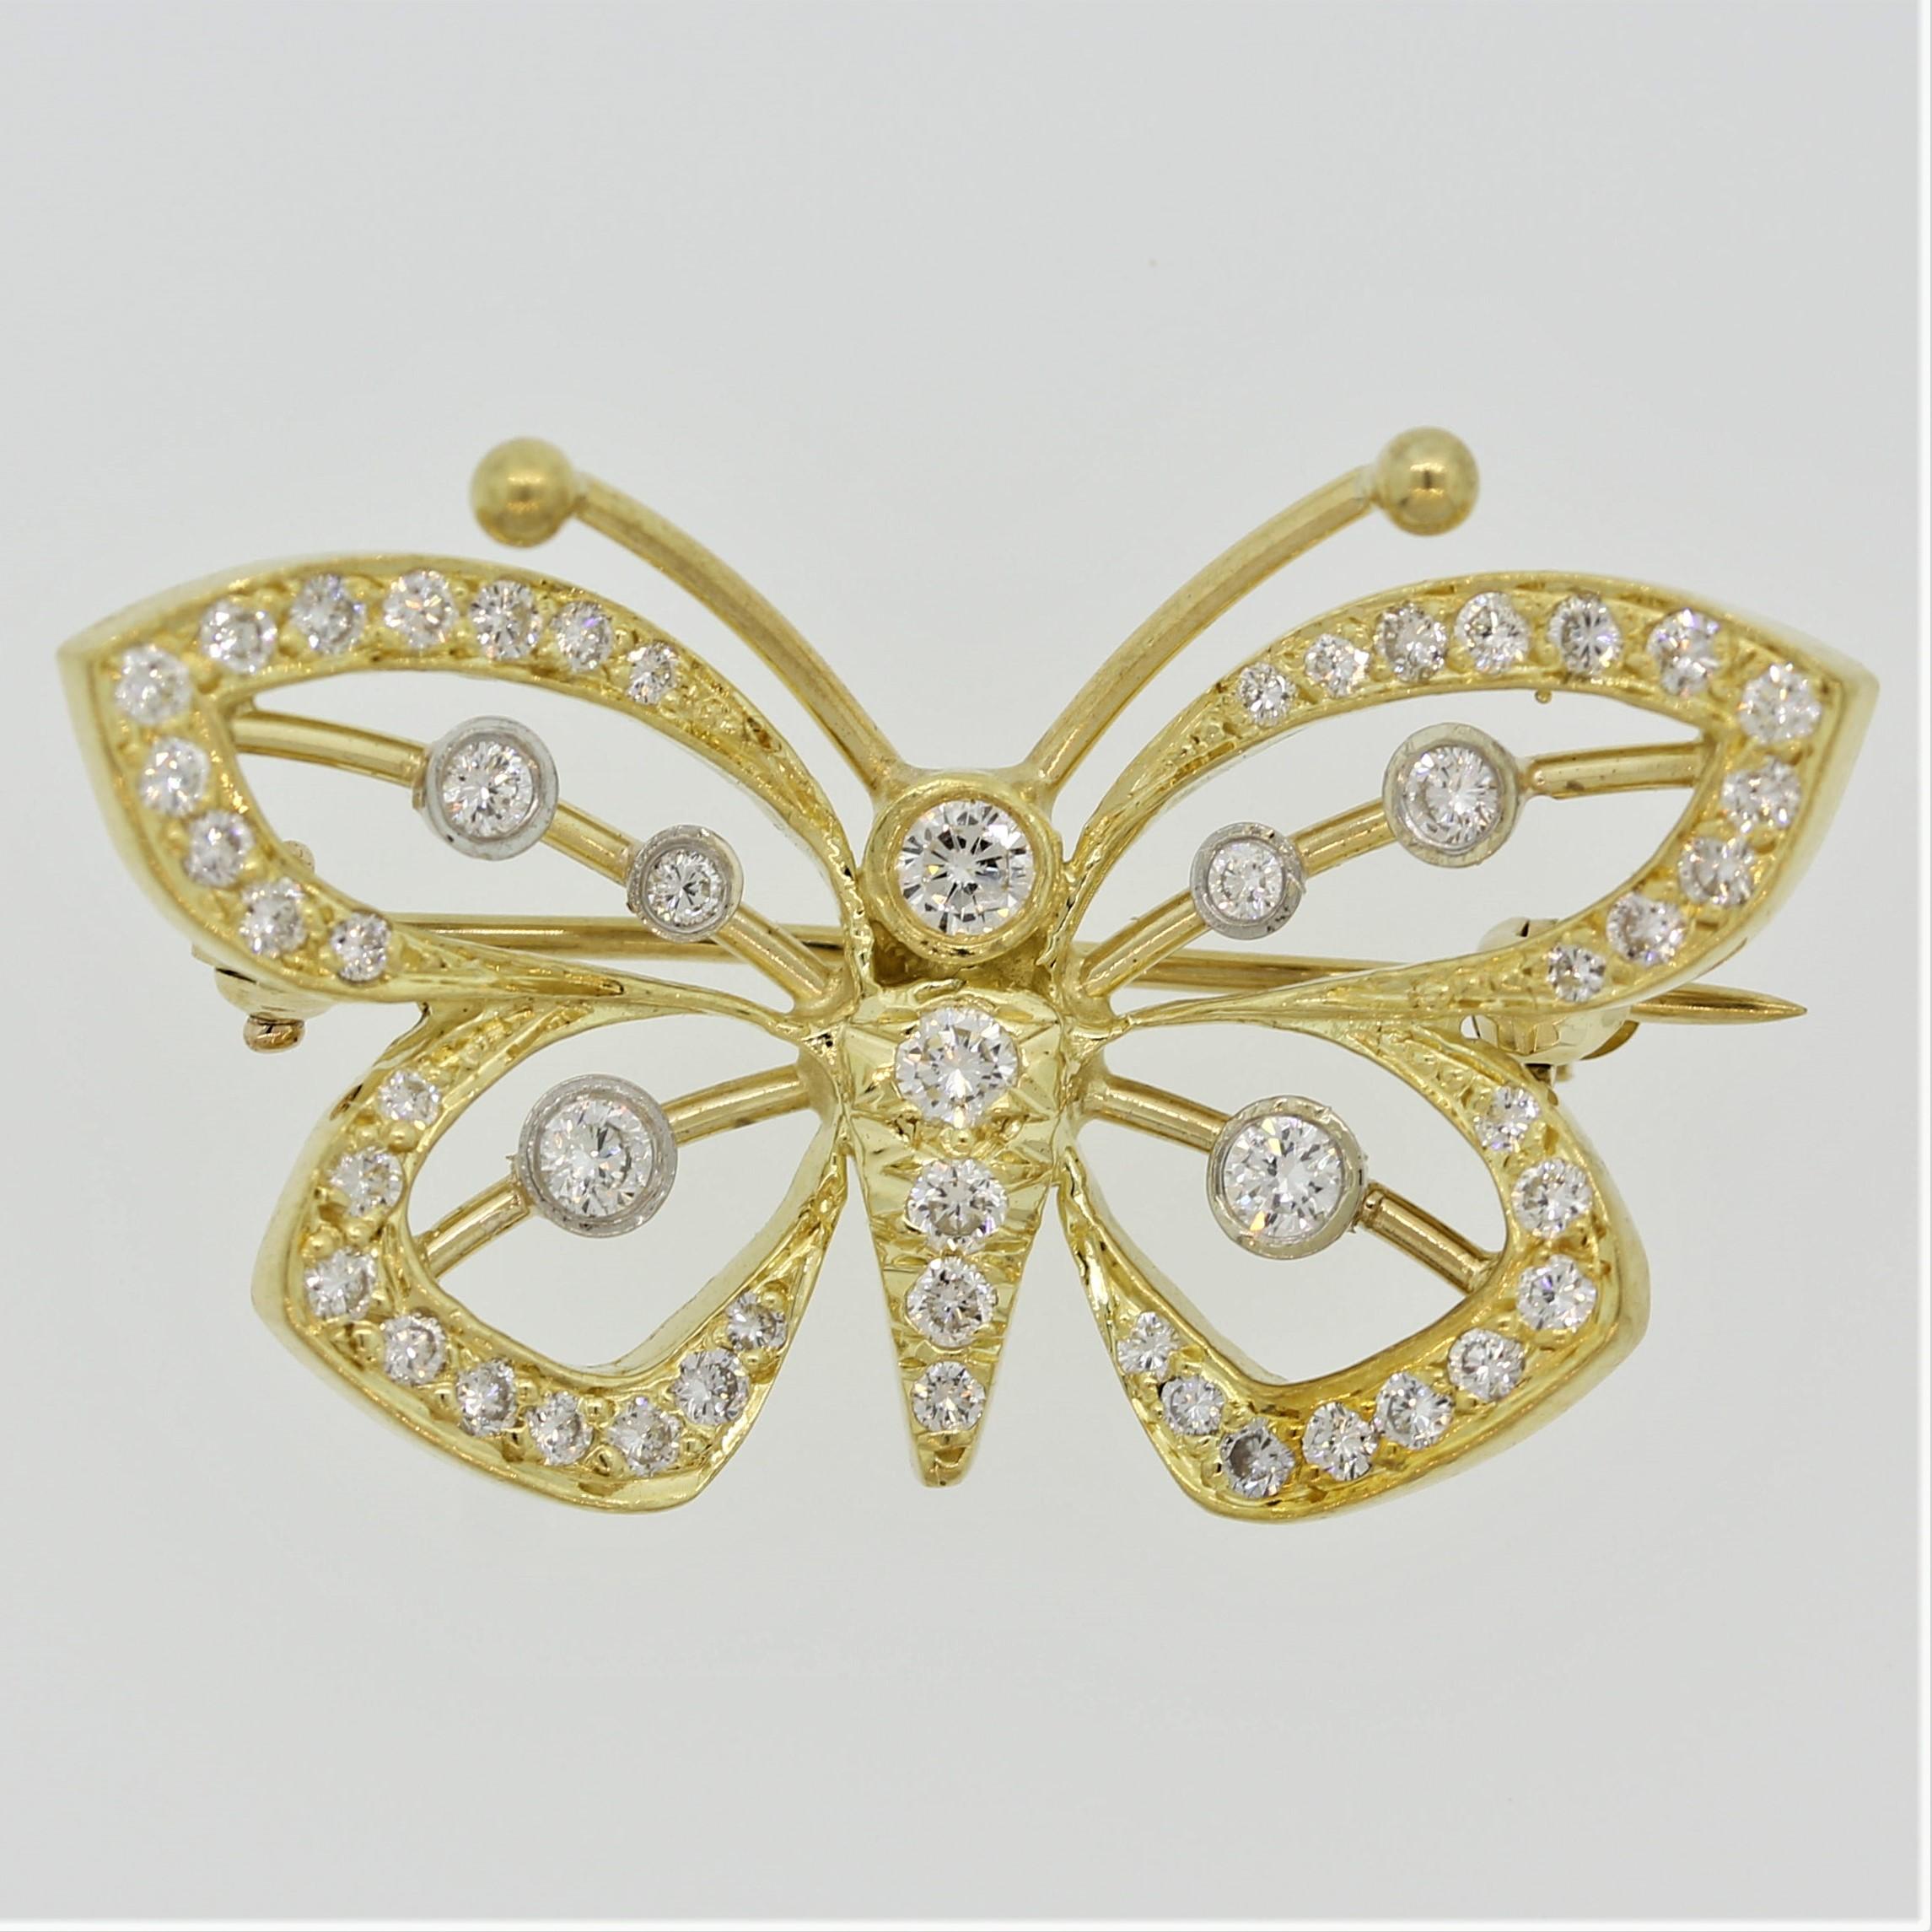 A beautiful and free butterfly featuring 0.93 carat of round brilliant cut diamonds. They are set in 18k yellow gold as well as bezel set in platinum in the center of the wings.

Length: 1.2 inches